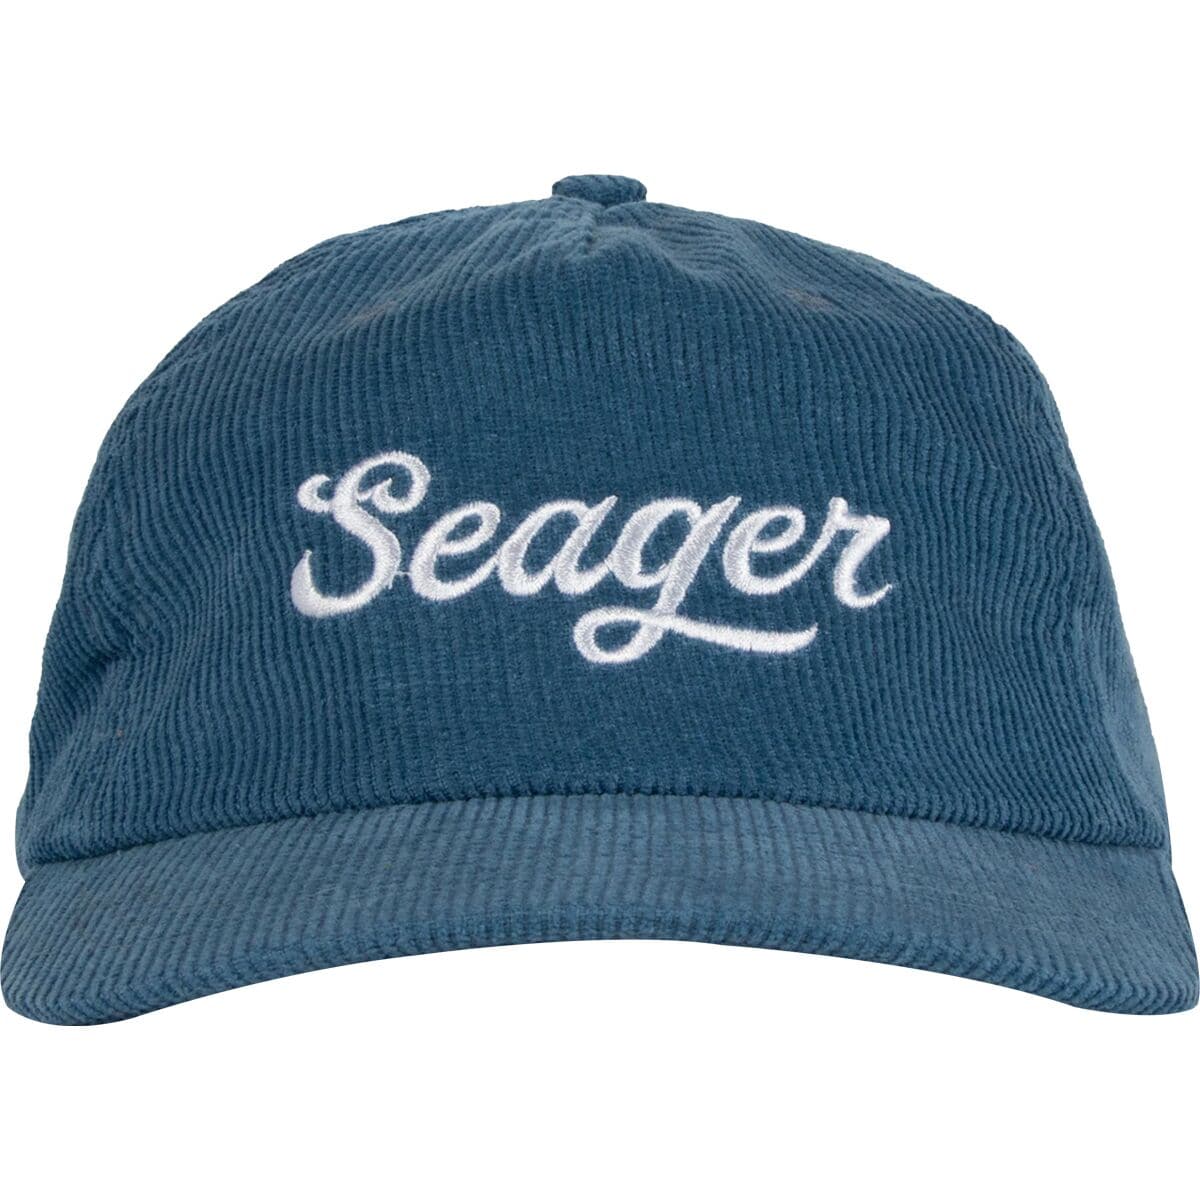 Seager Co. Big Blue Corduroy Snapback - Accessories